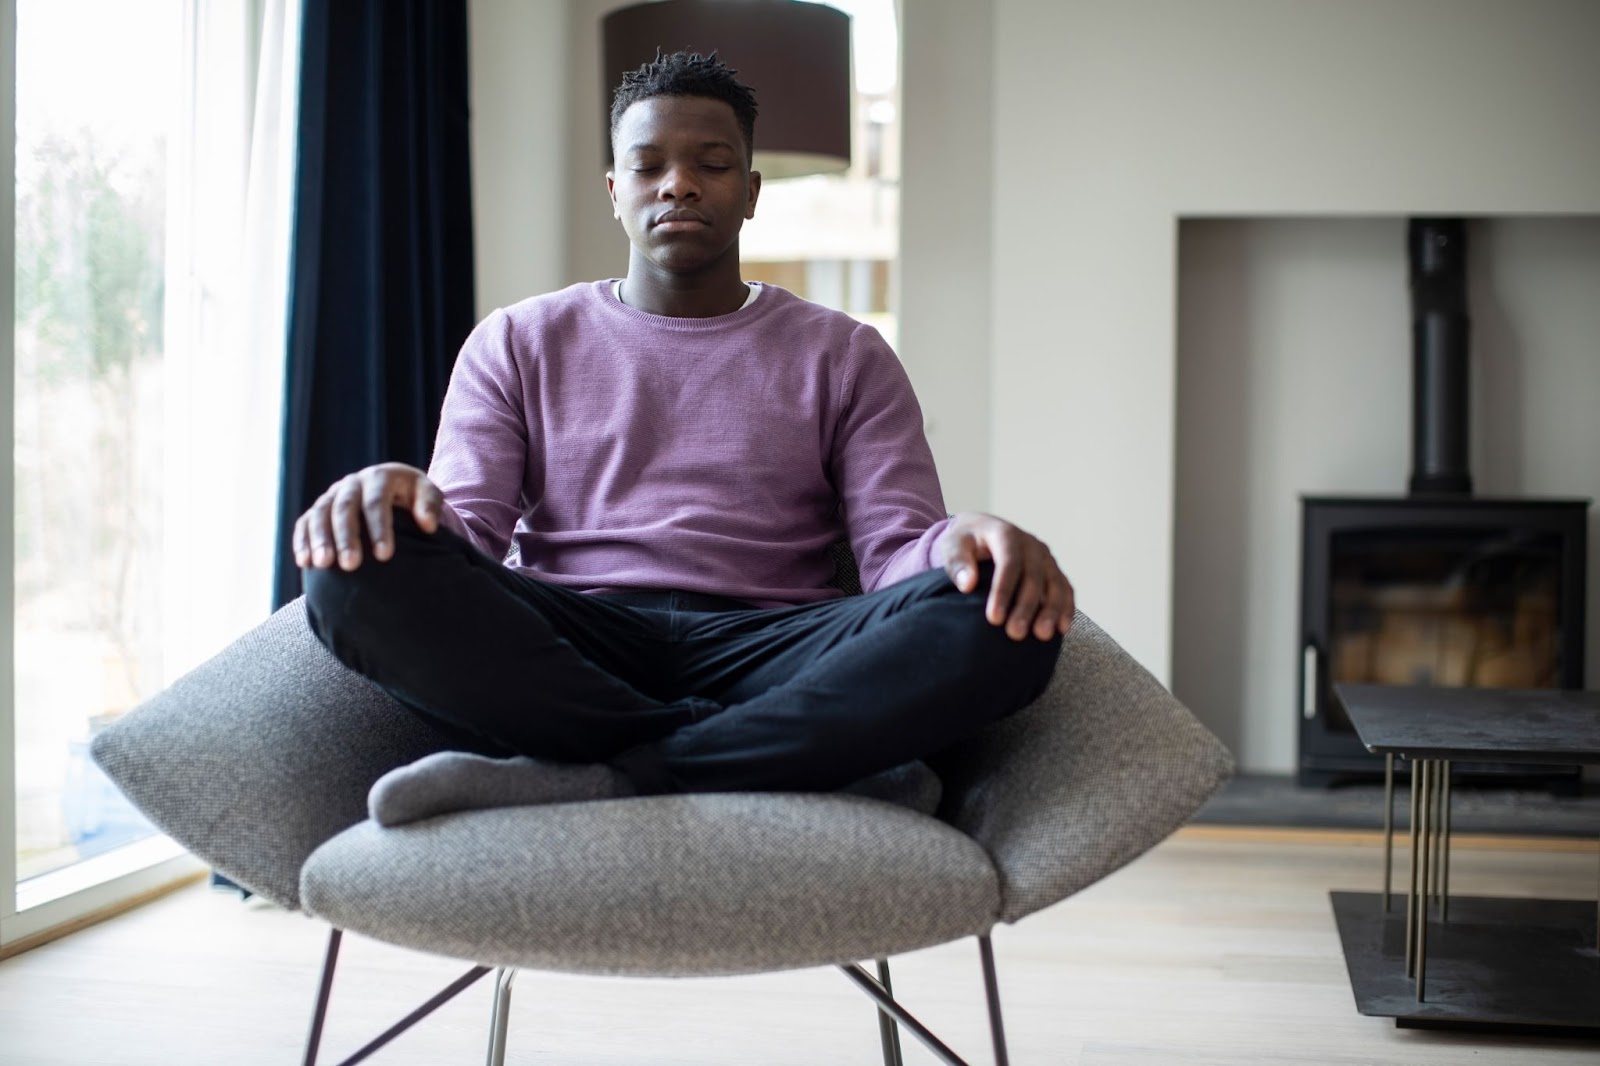 Young man in a purple shirt meditating in a chair